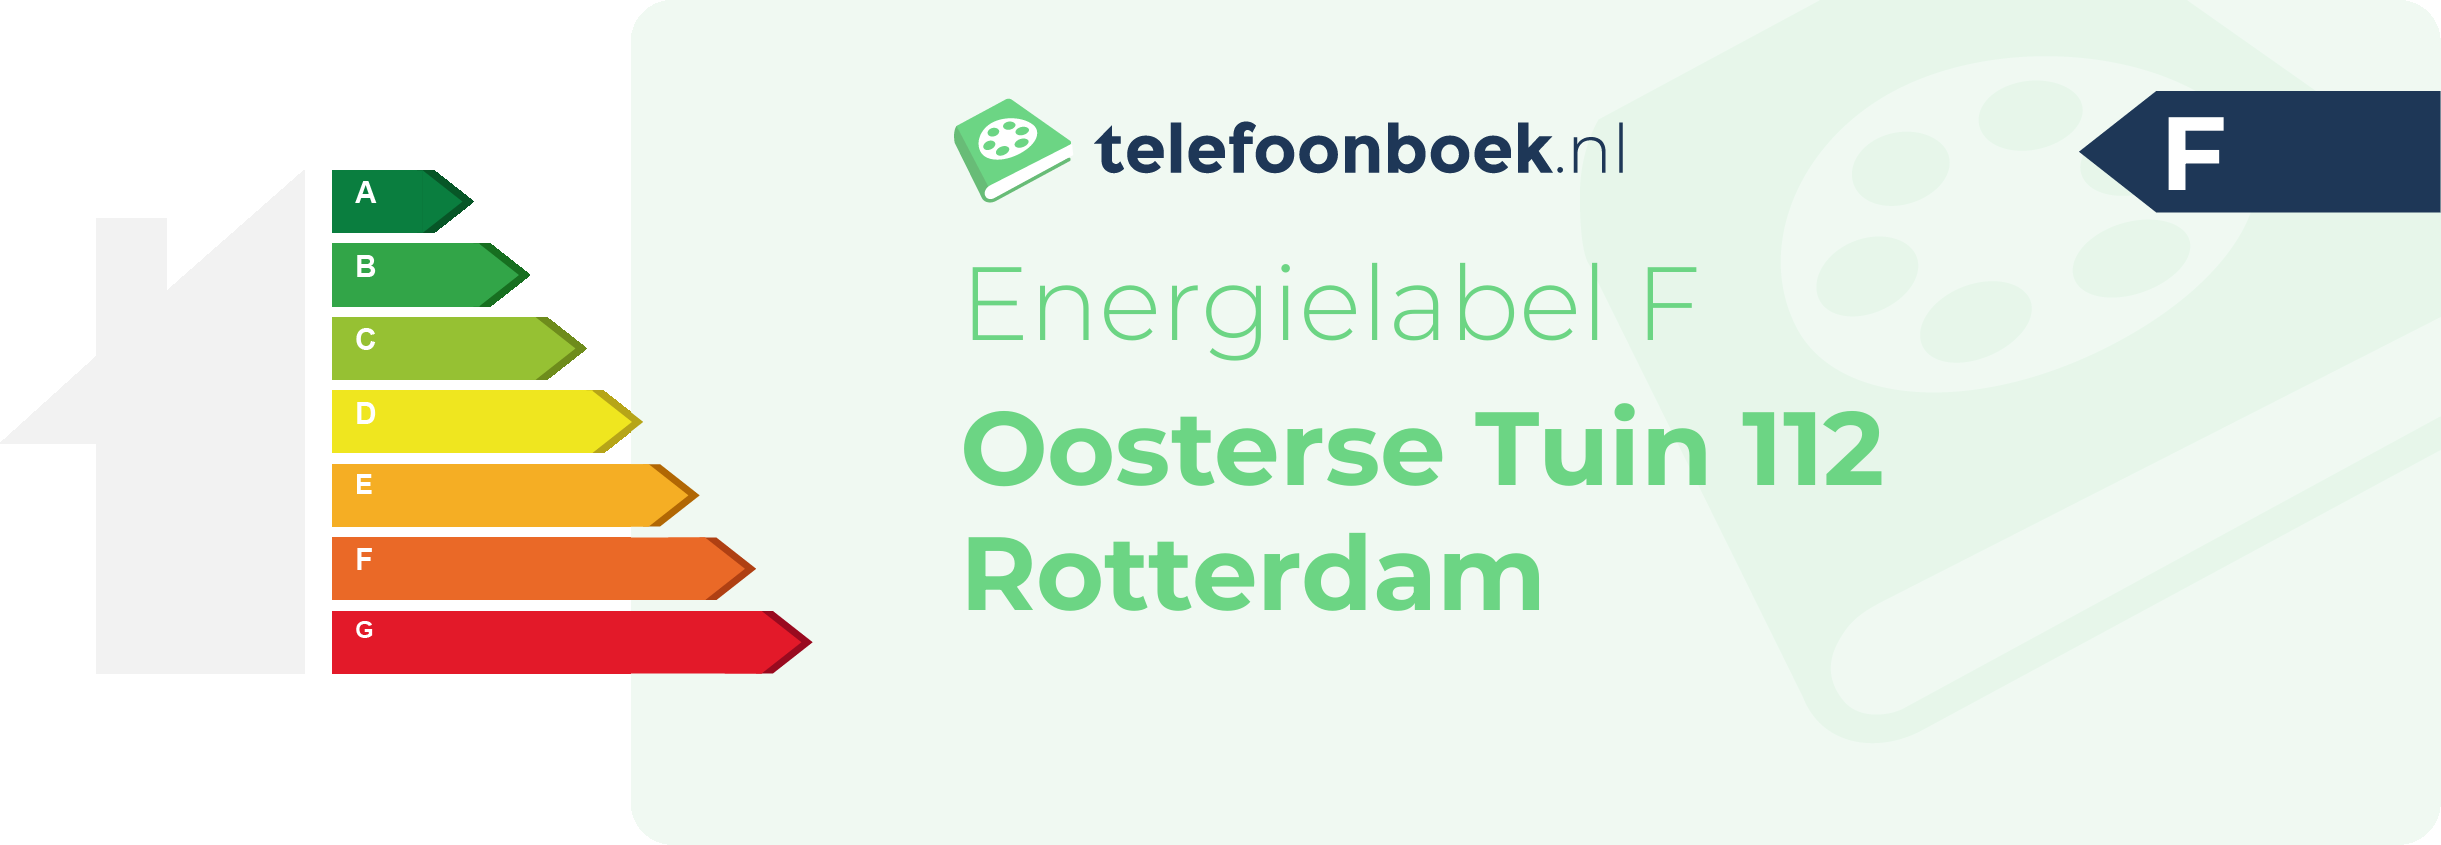 Energielabel Oosterse Tuin 112 Rotterdam